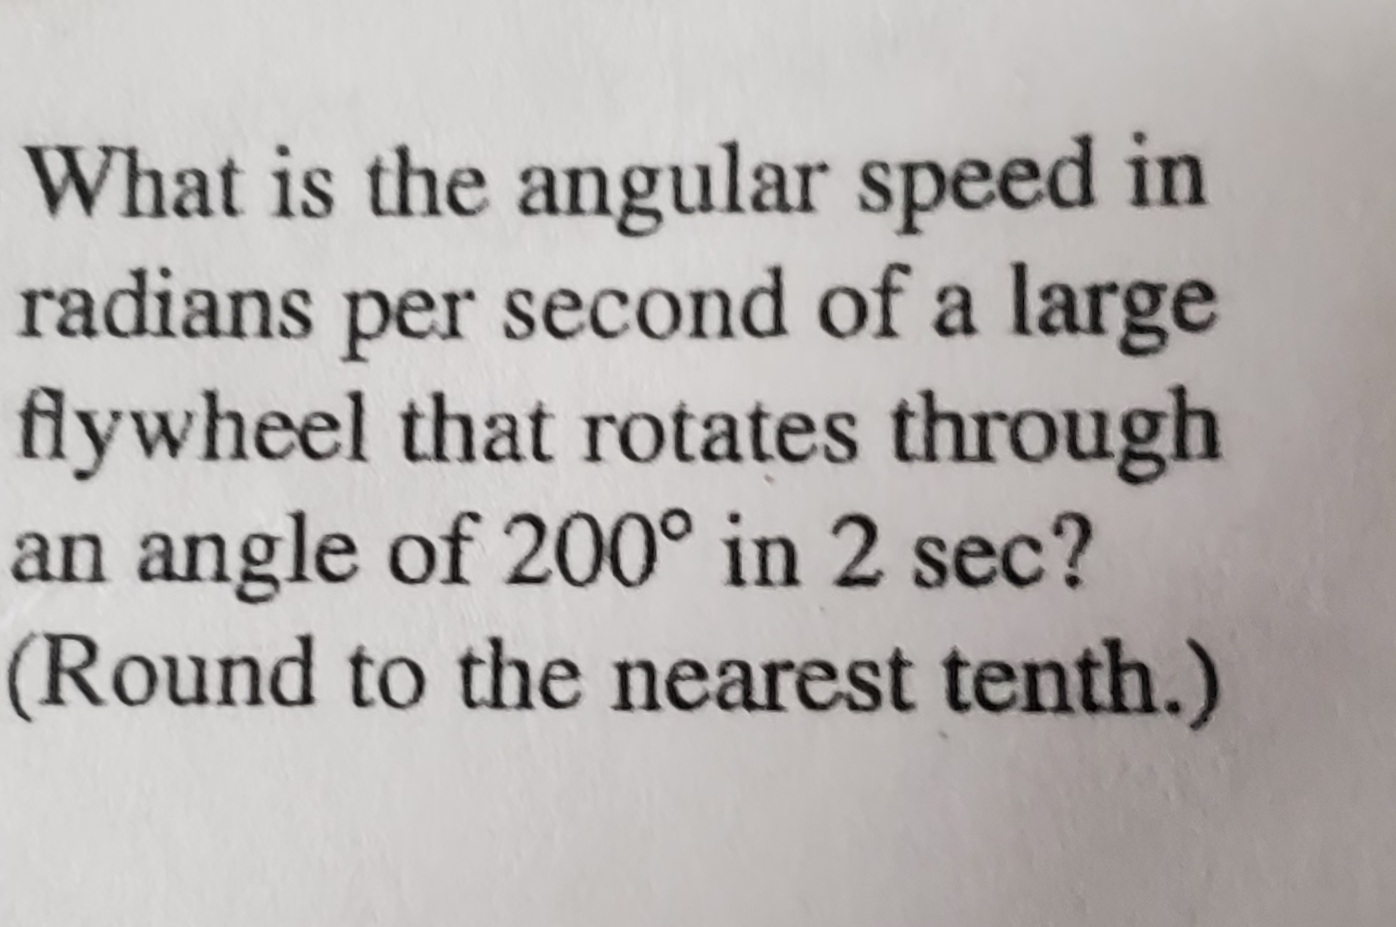 What is the angular speed in
radians per second of a large
flywheel that rotates through
an angle of 200° in 2 sec?
(Round to the nearest tenth.)
